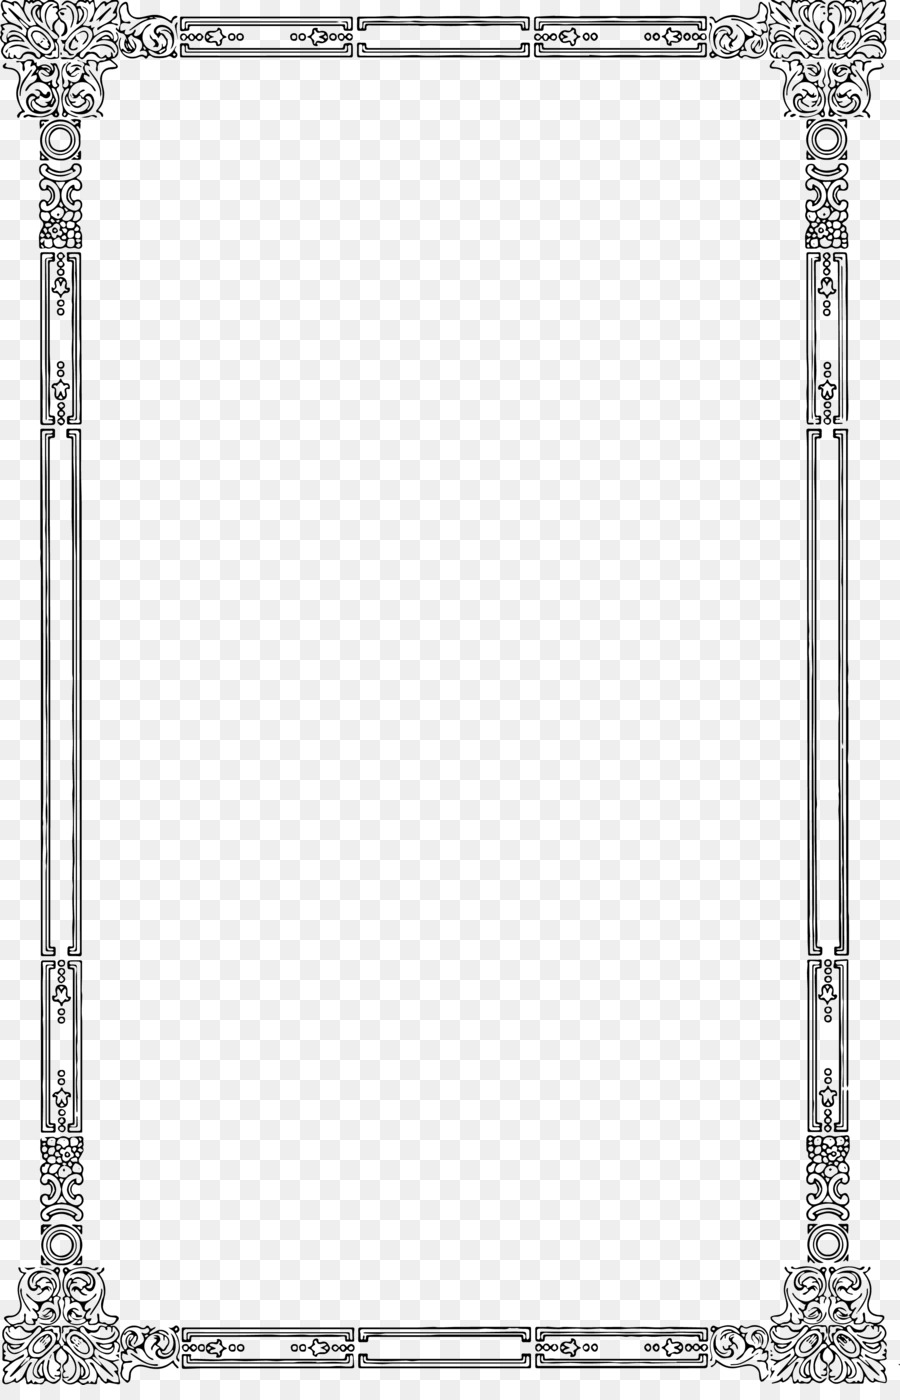 Vector graphics Portable Network Graphics Clip art Image Borders and Frames - fancy borders png koran ayodhya png download - 2422*3727 - Free Transparent BORDERS AND FRAMES png Download.